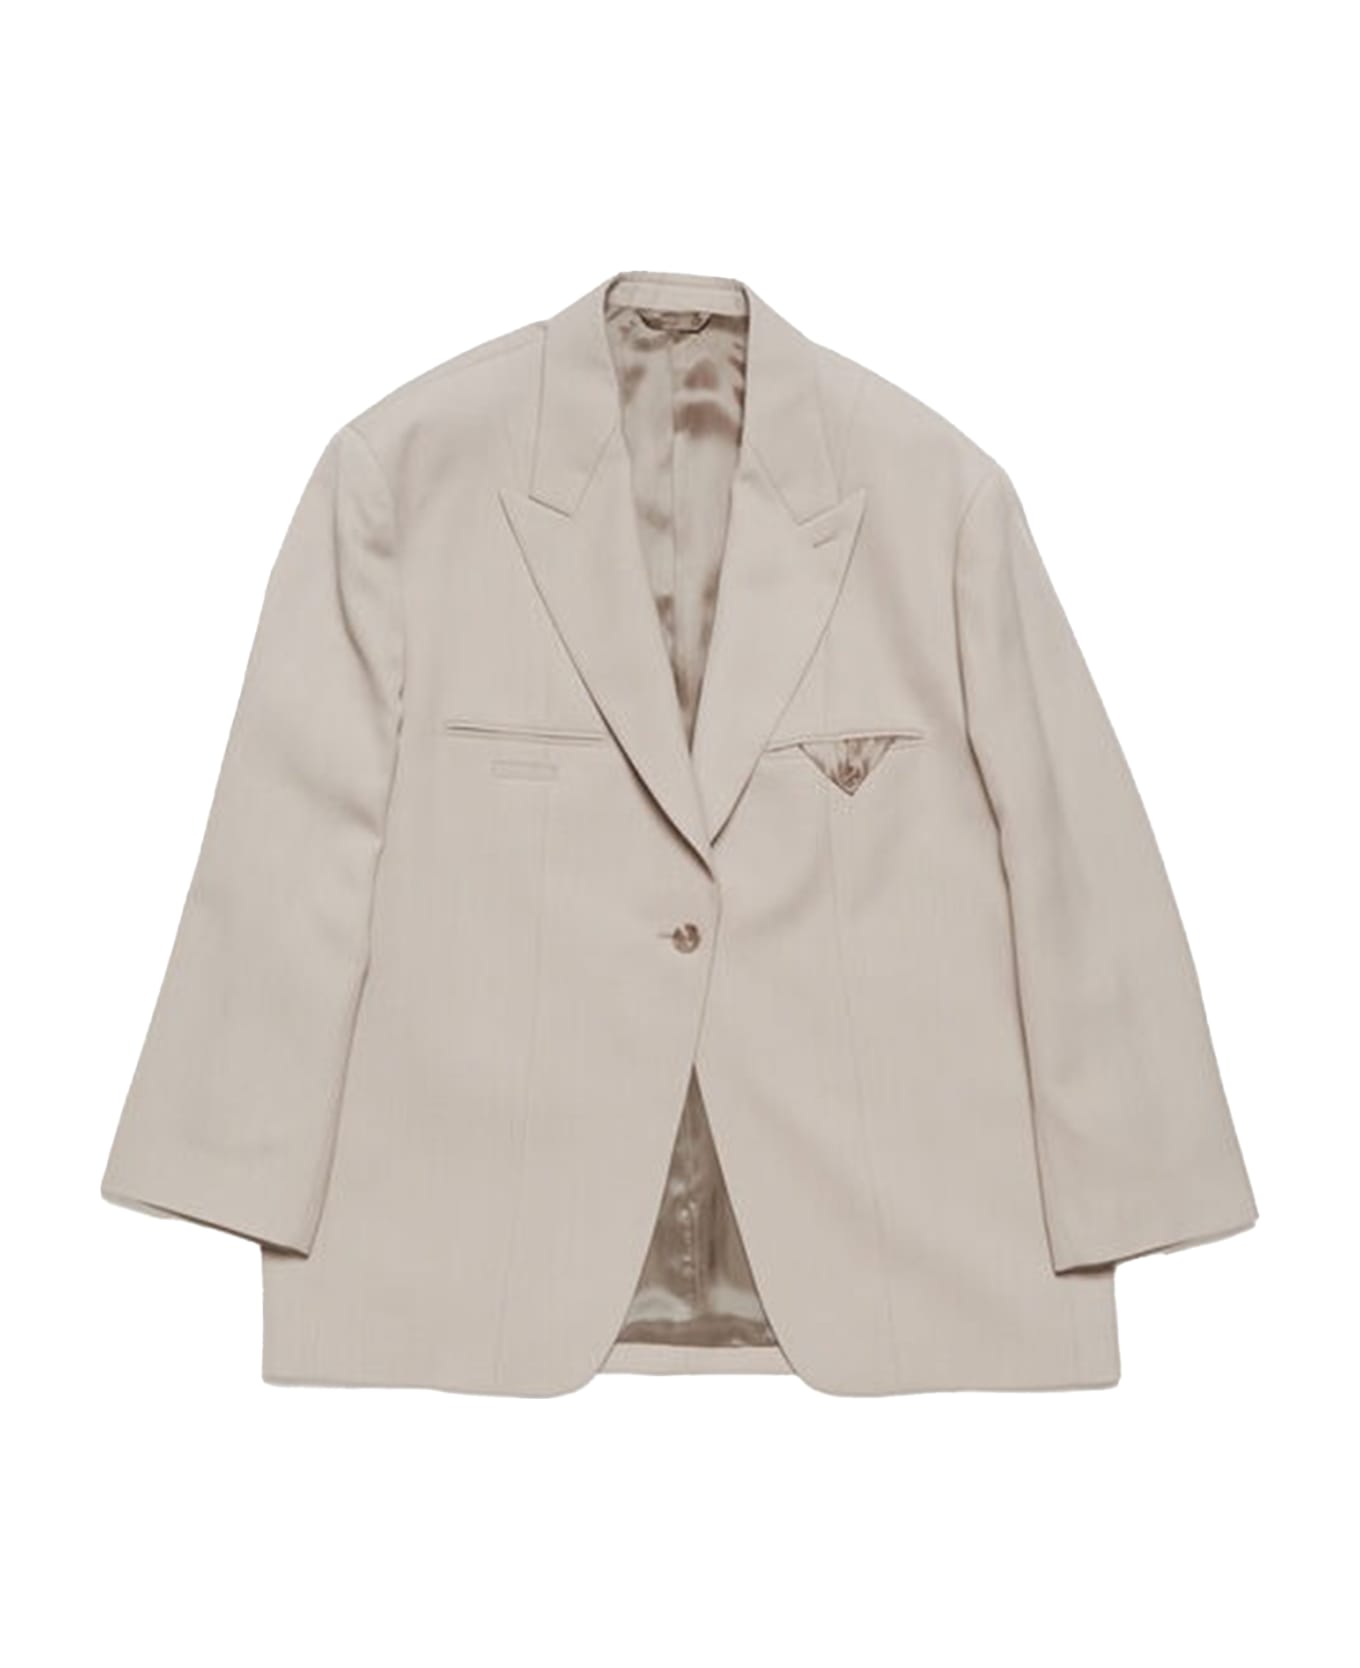 Acne Studios Beige Tailored Single-breasted Jacket - COLD BEIGE